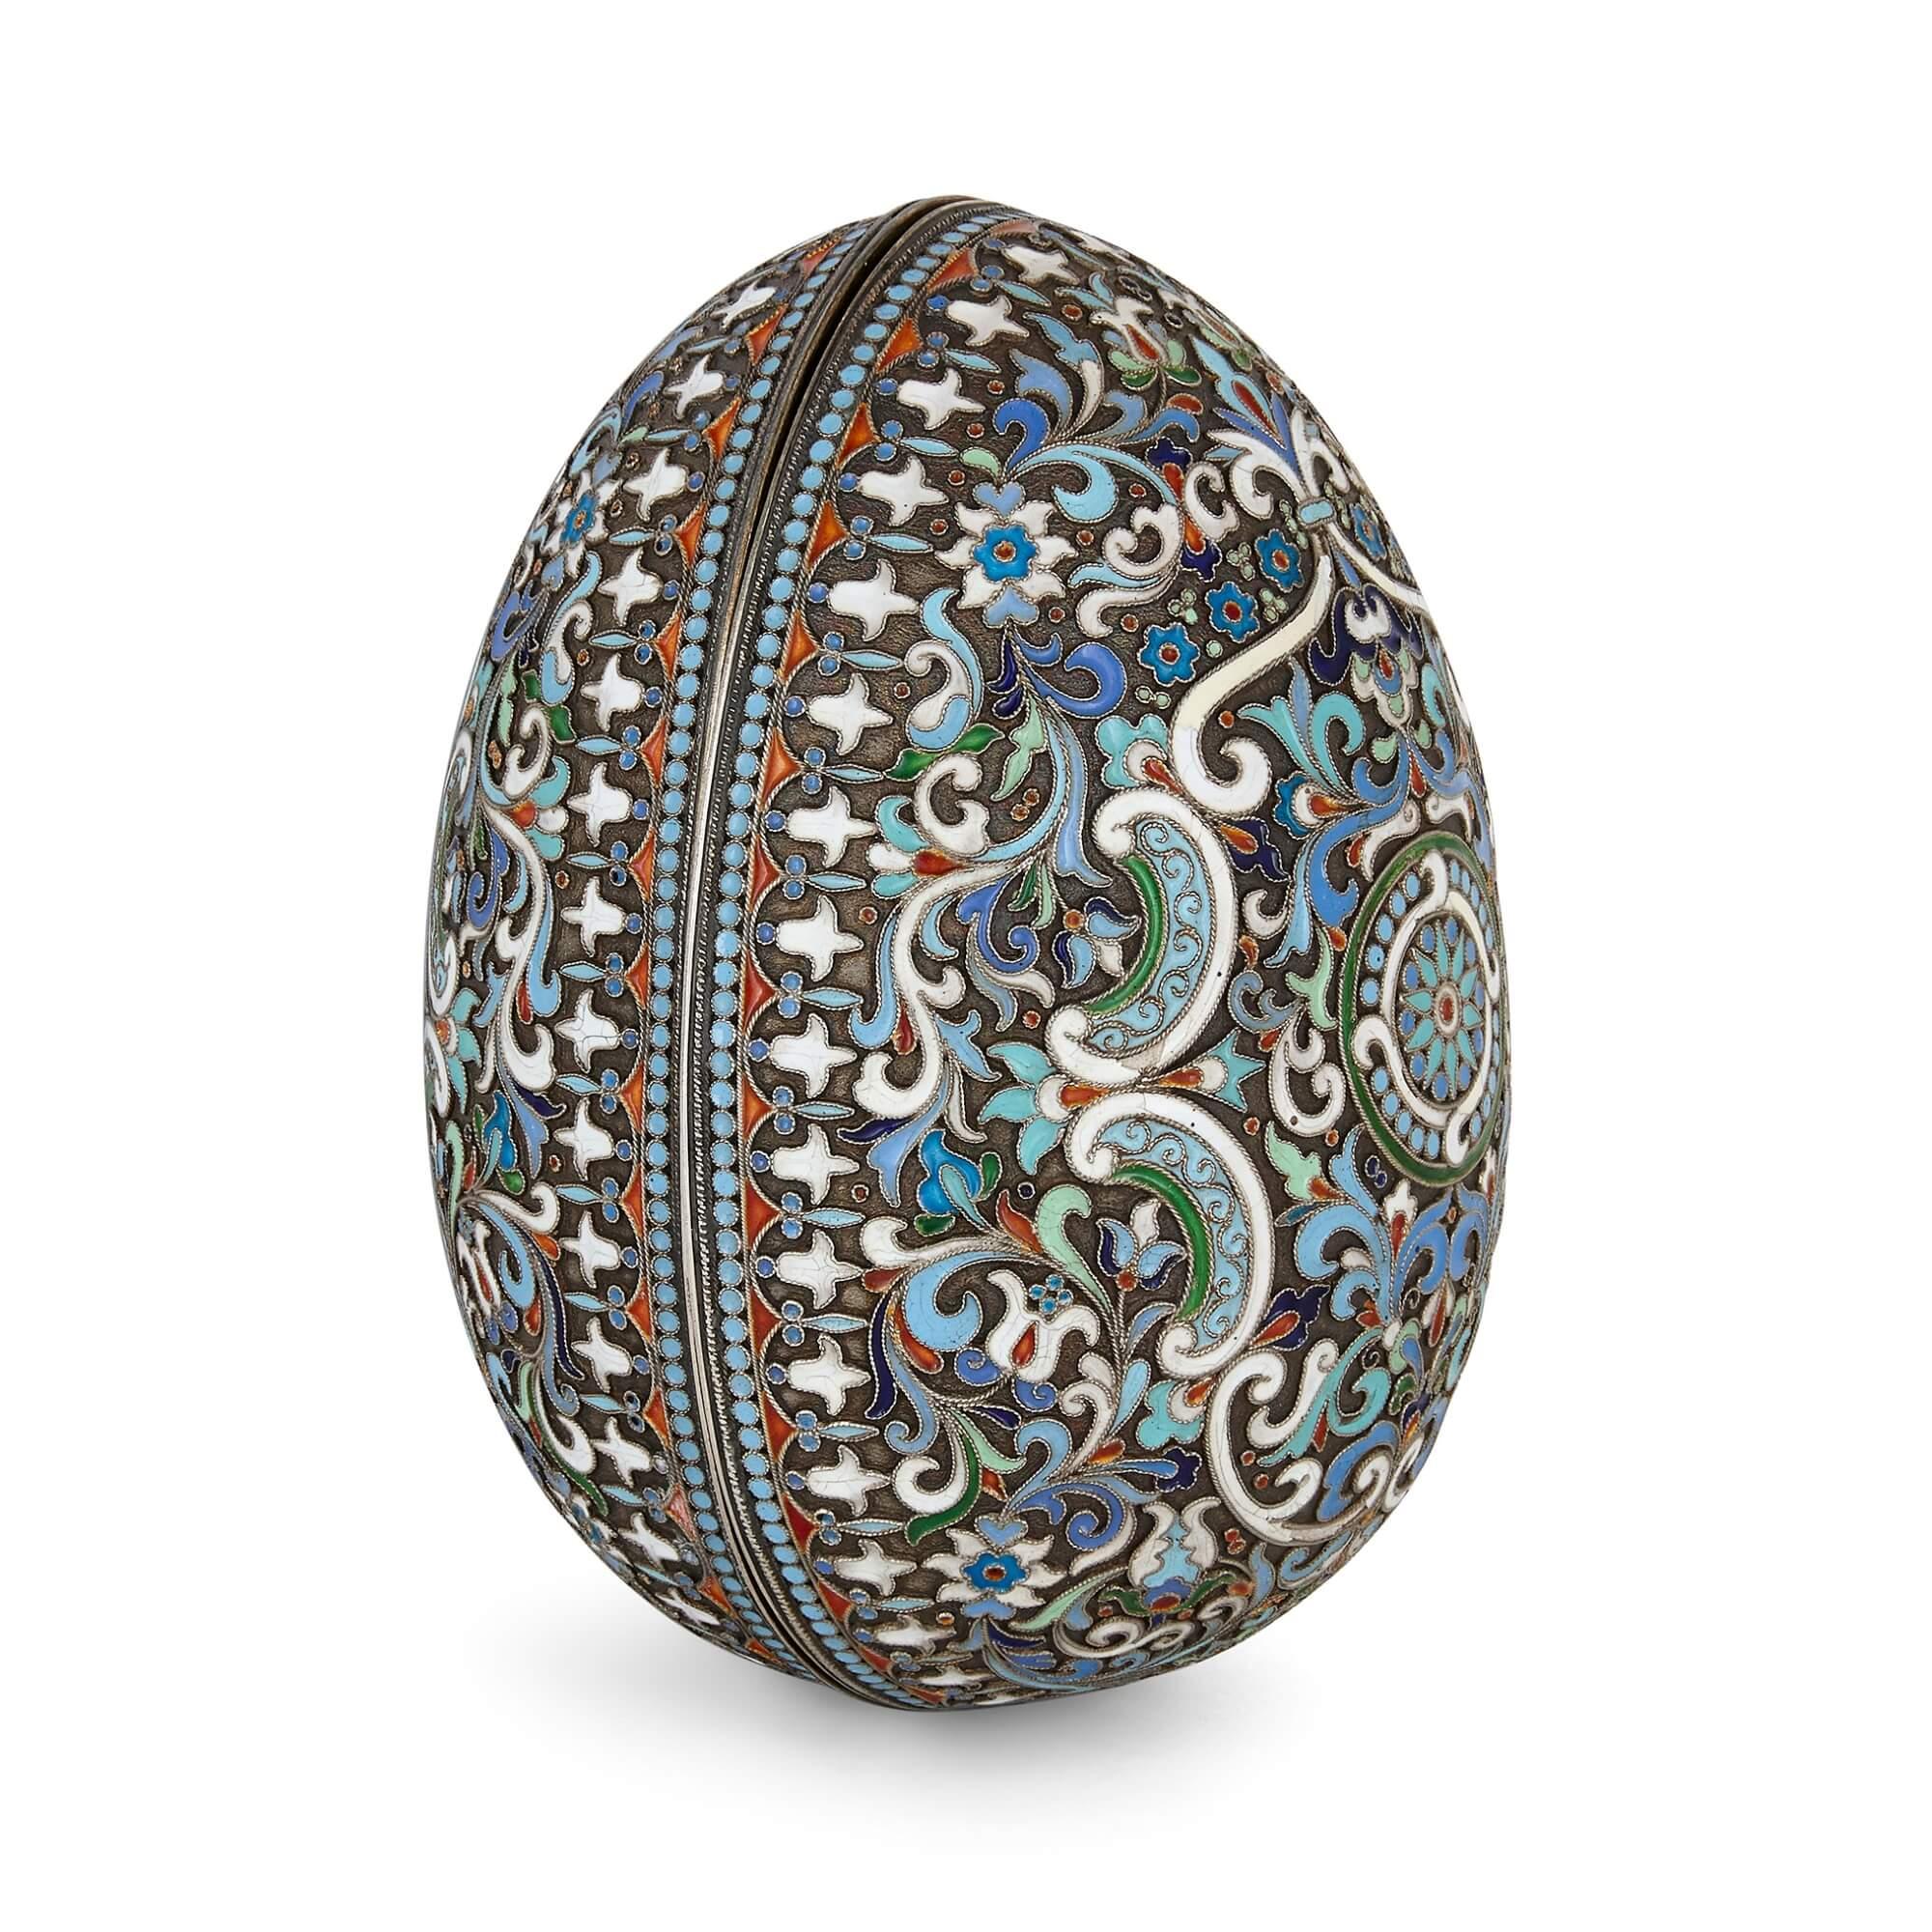 Russian Fabergé style cloisonné enamel Easter egg
Russian, 20th Century
Height 12.5cm, diameter 9.5cm

This delicately patterned Russian egg is of typical form and crafted in gilt silver. The entire surface of the egg is decorated all over in the